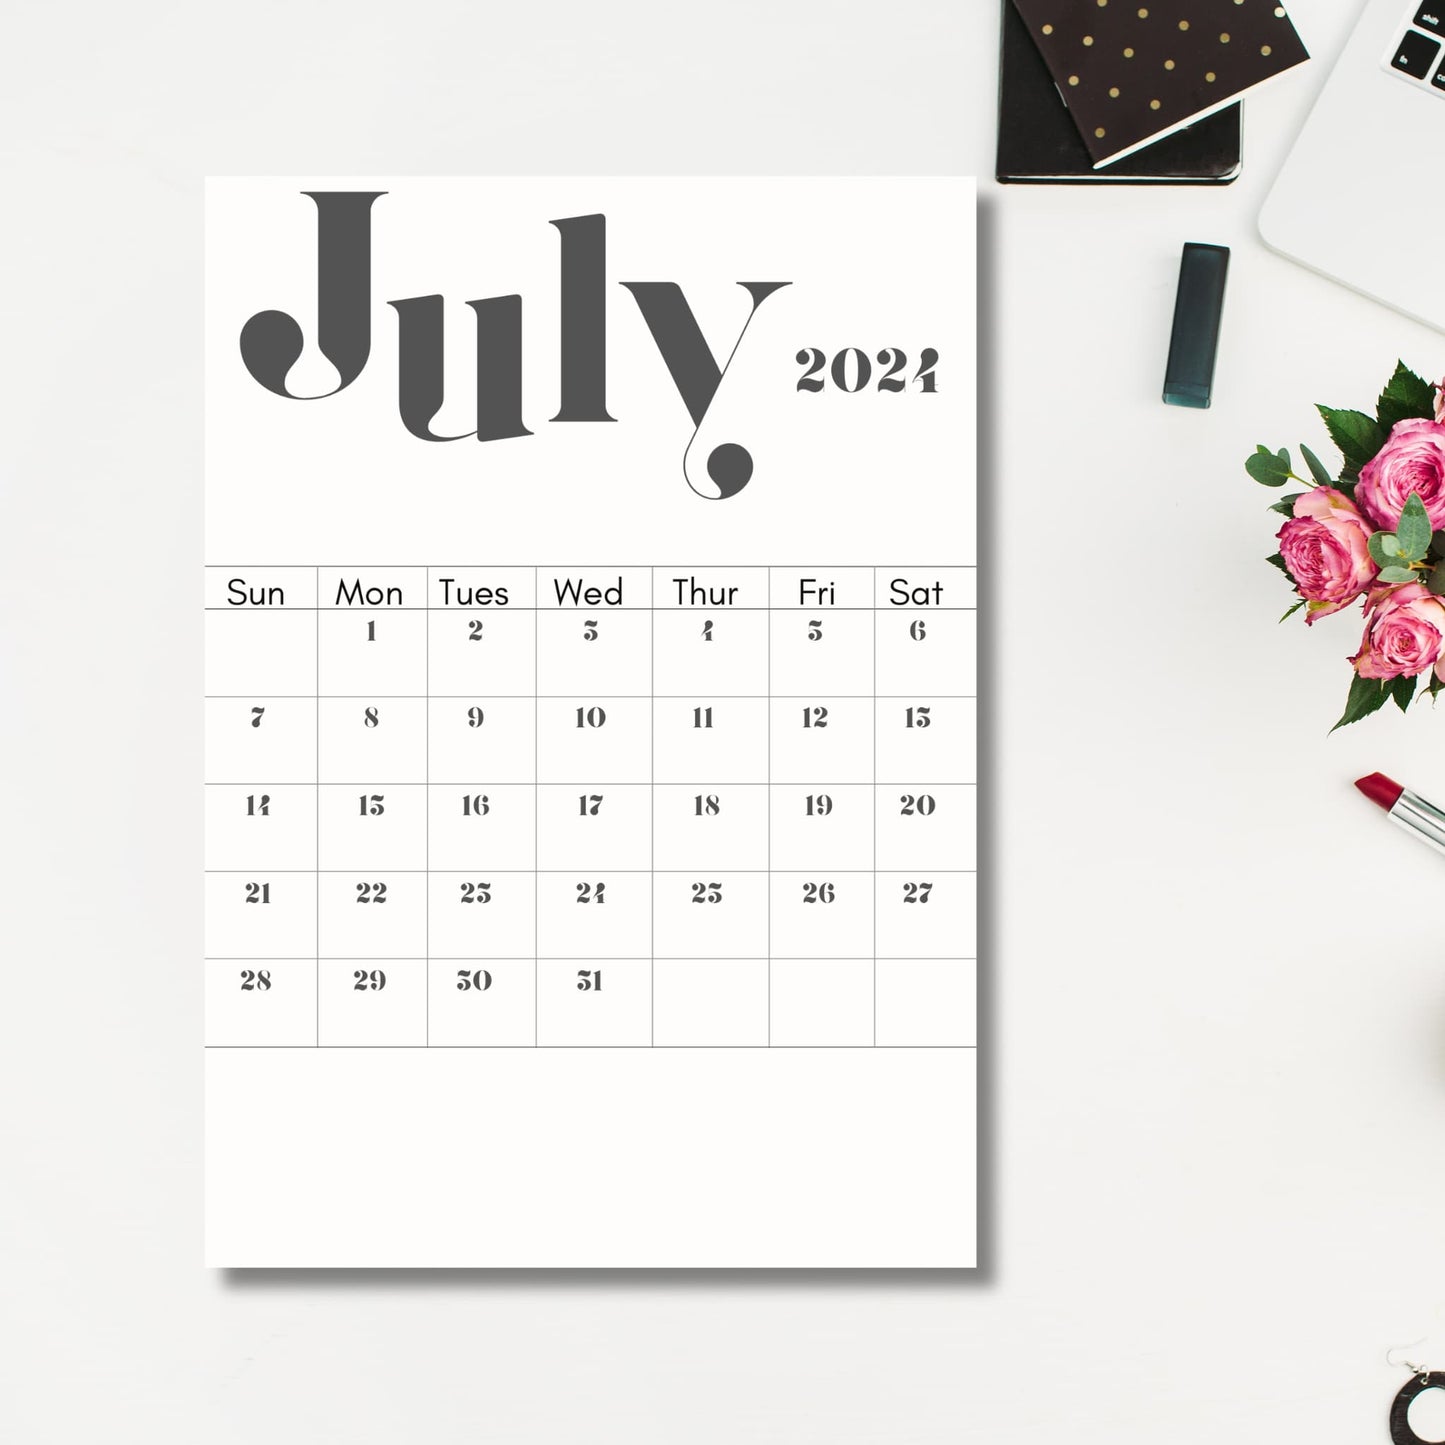 July 2024 printed calendar sheet on the grey table with office accessories beside it.